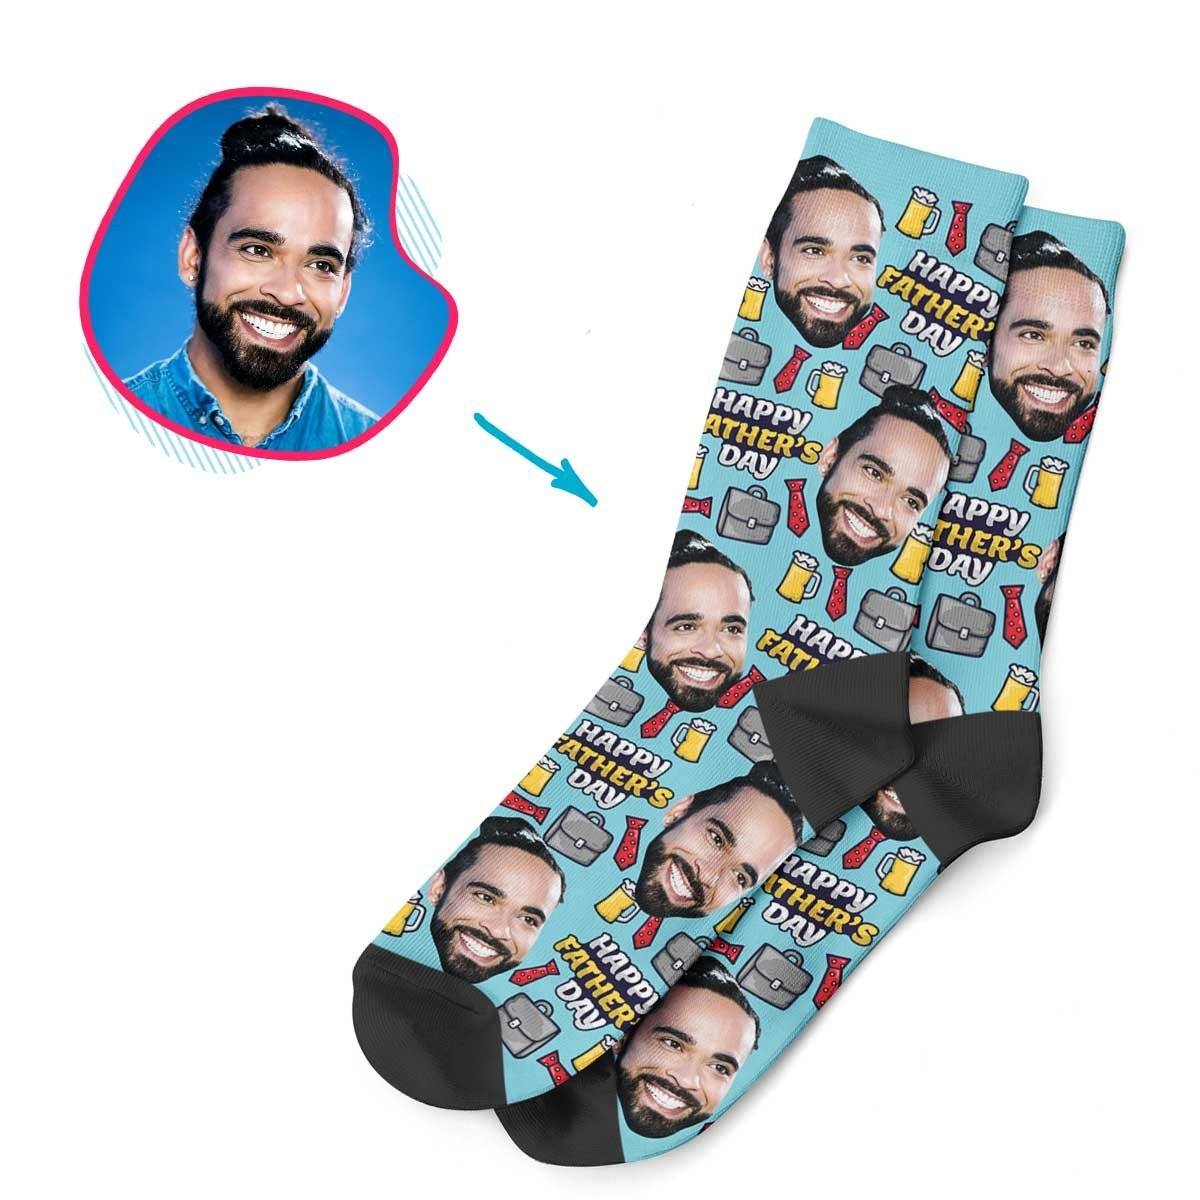 Blue Fathers Day personalized socks with photo of face printed on them